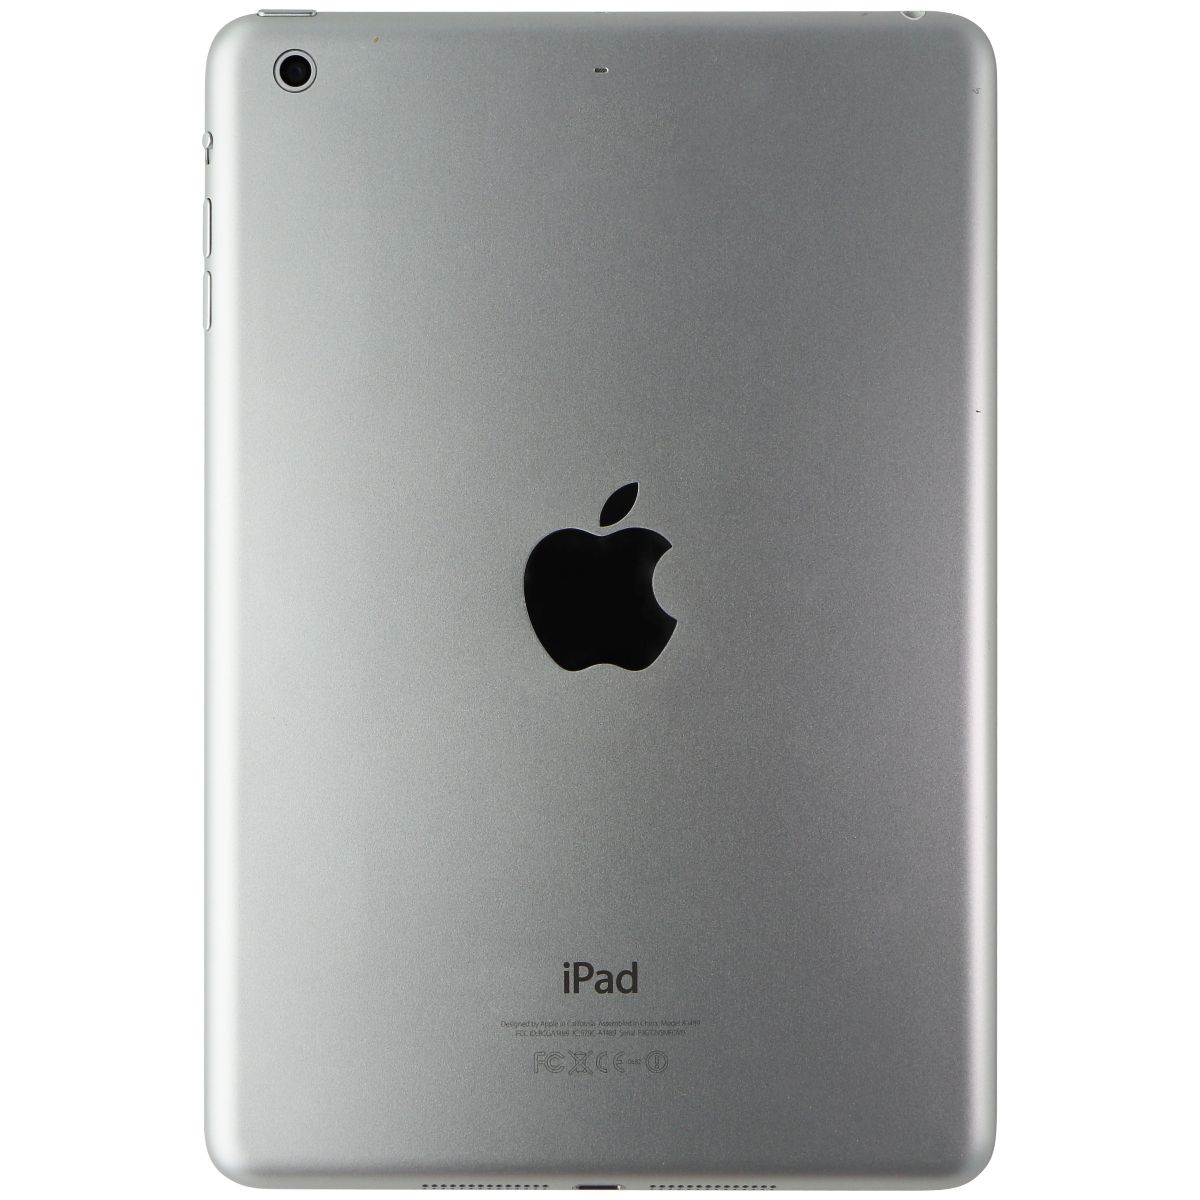 Apple iPad mini 2 (7.9-inch) Tablet (A1489) Wi-Fi ONLY - 128GB / Silver iPads, Tablets & eBook Readers Apple    - Simple Cell Bulk Wholesale Pricing - USA Seller